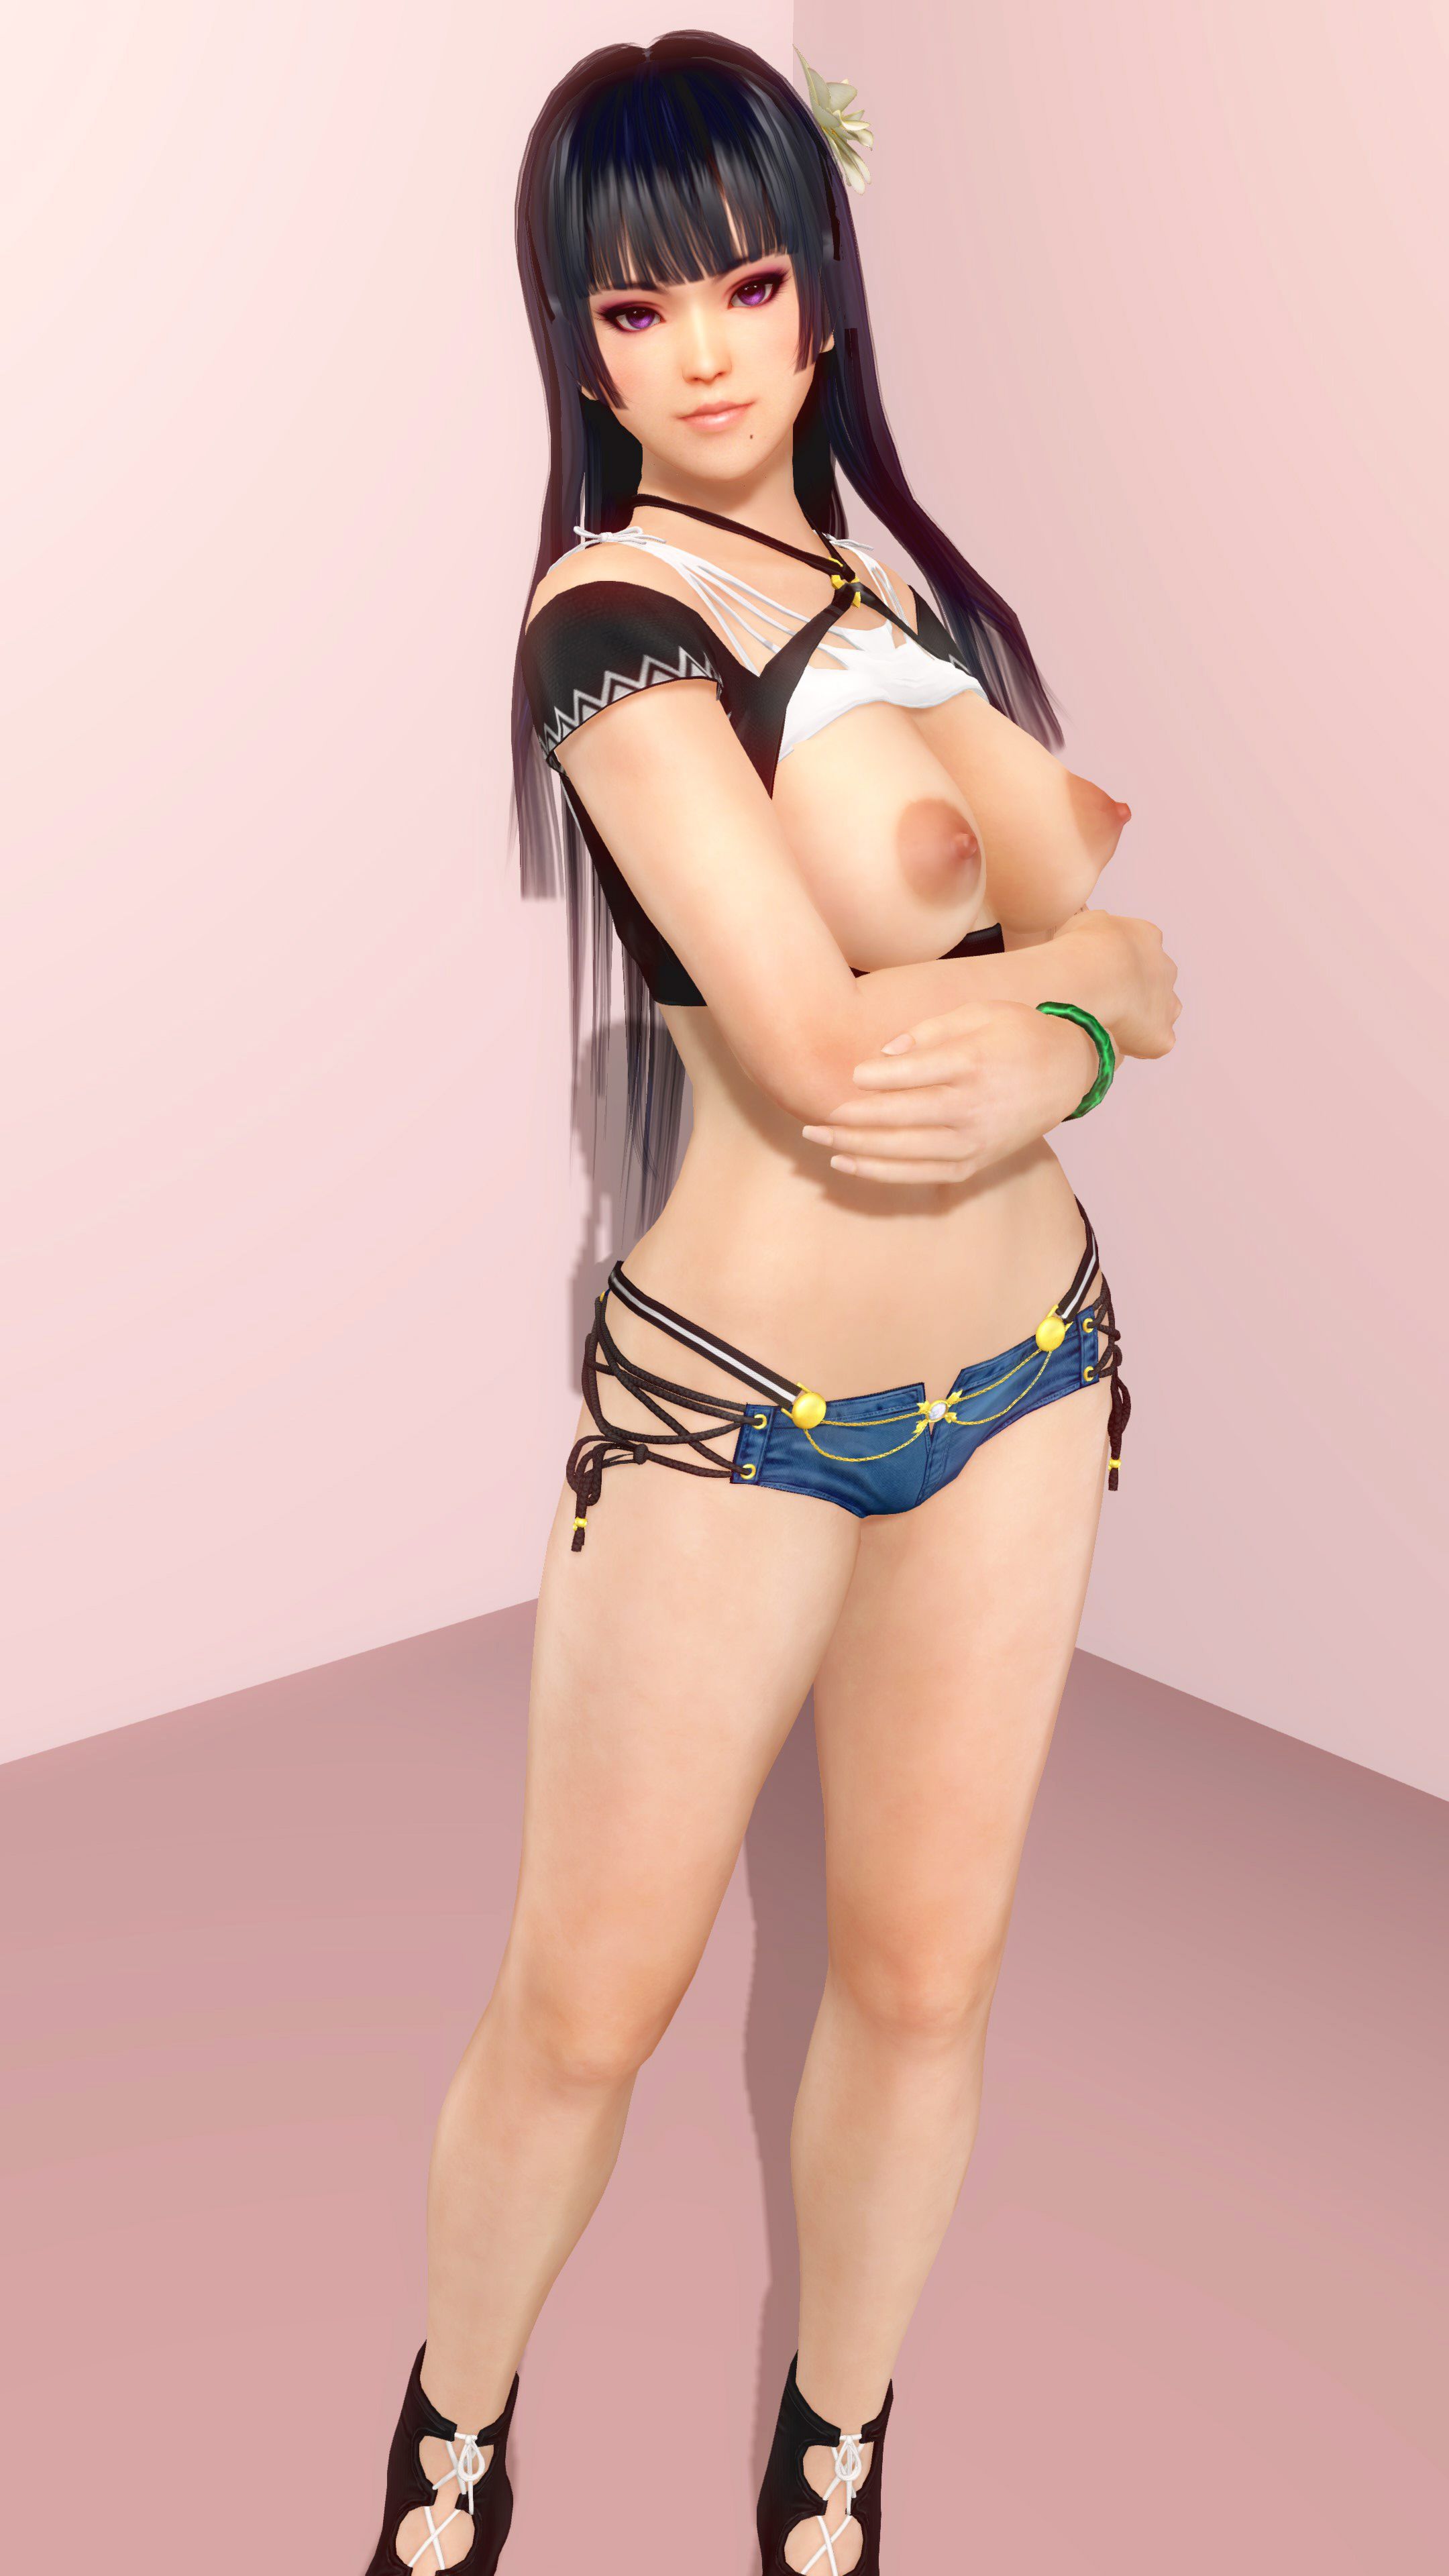 [DEAD OR ALIVE] 3D CG erotic images of DOA heroines Part 5 31